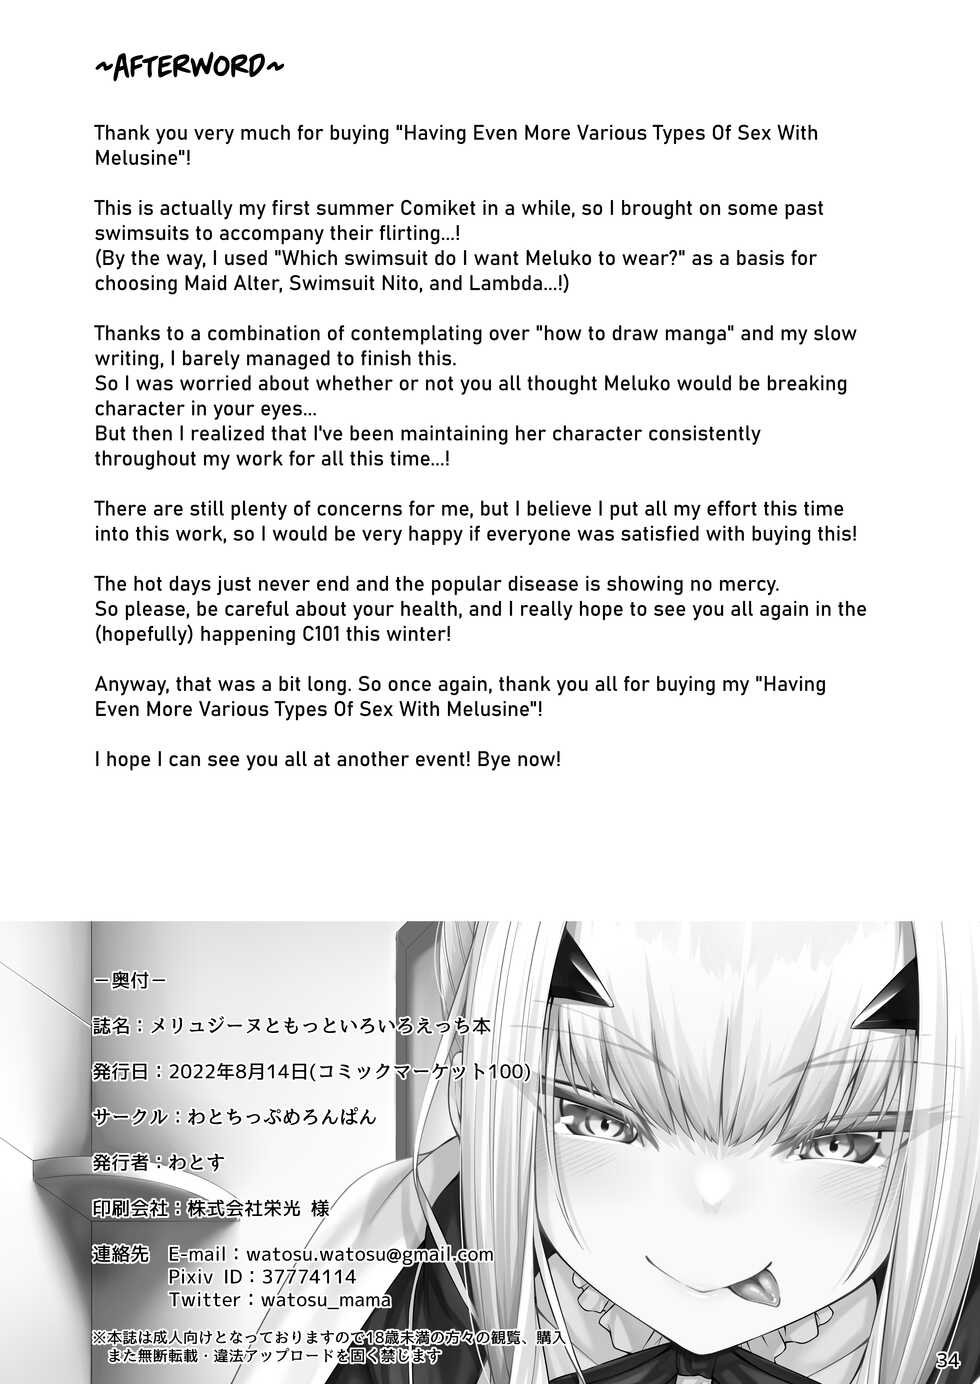 [Watochip Melonpan (Watosu)] Melusine to Motto Iroiro Ecchi Hon | Having Even More Various Types Of Sex With Melusine (Fate/Grand Order) [English] [UncontrolSwitchOverflow] [Digital] - Page 34